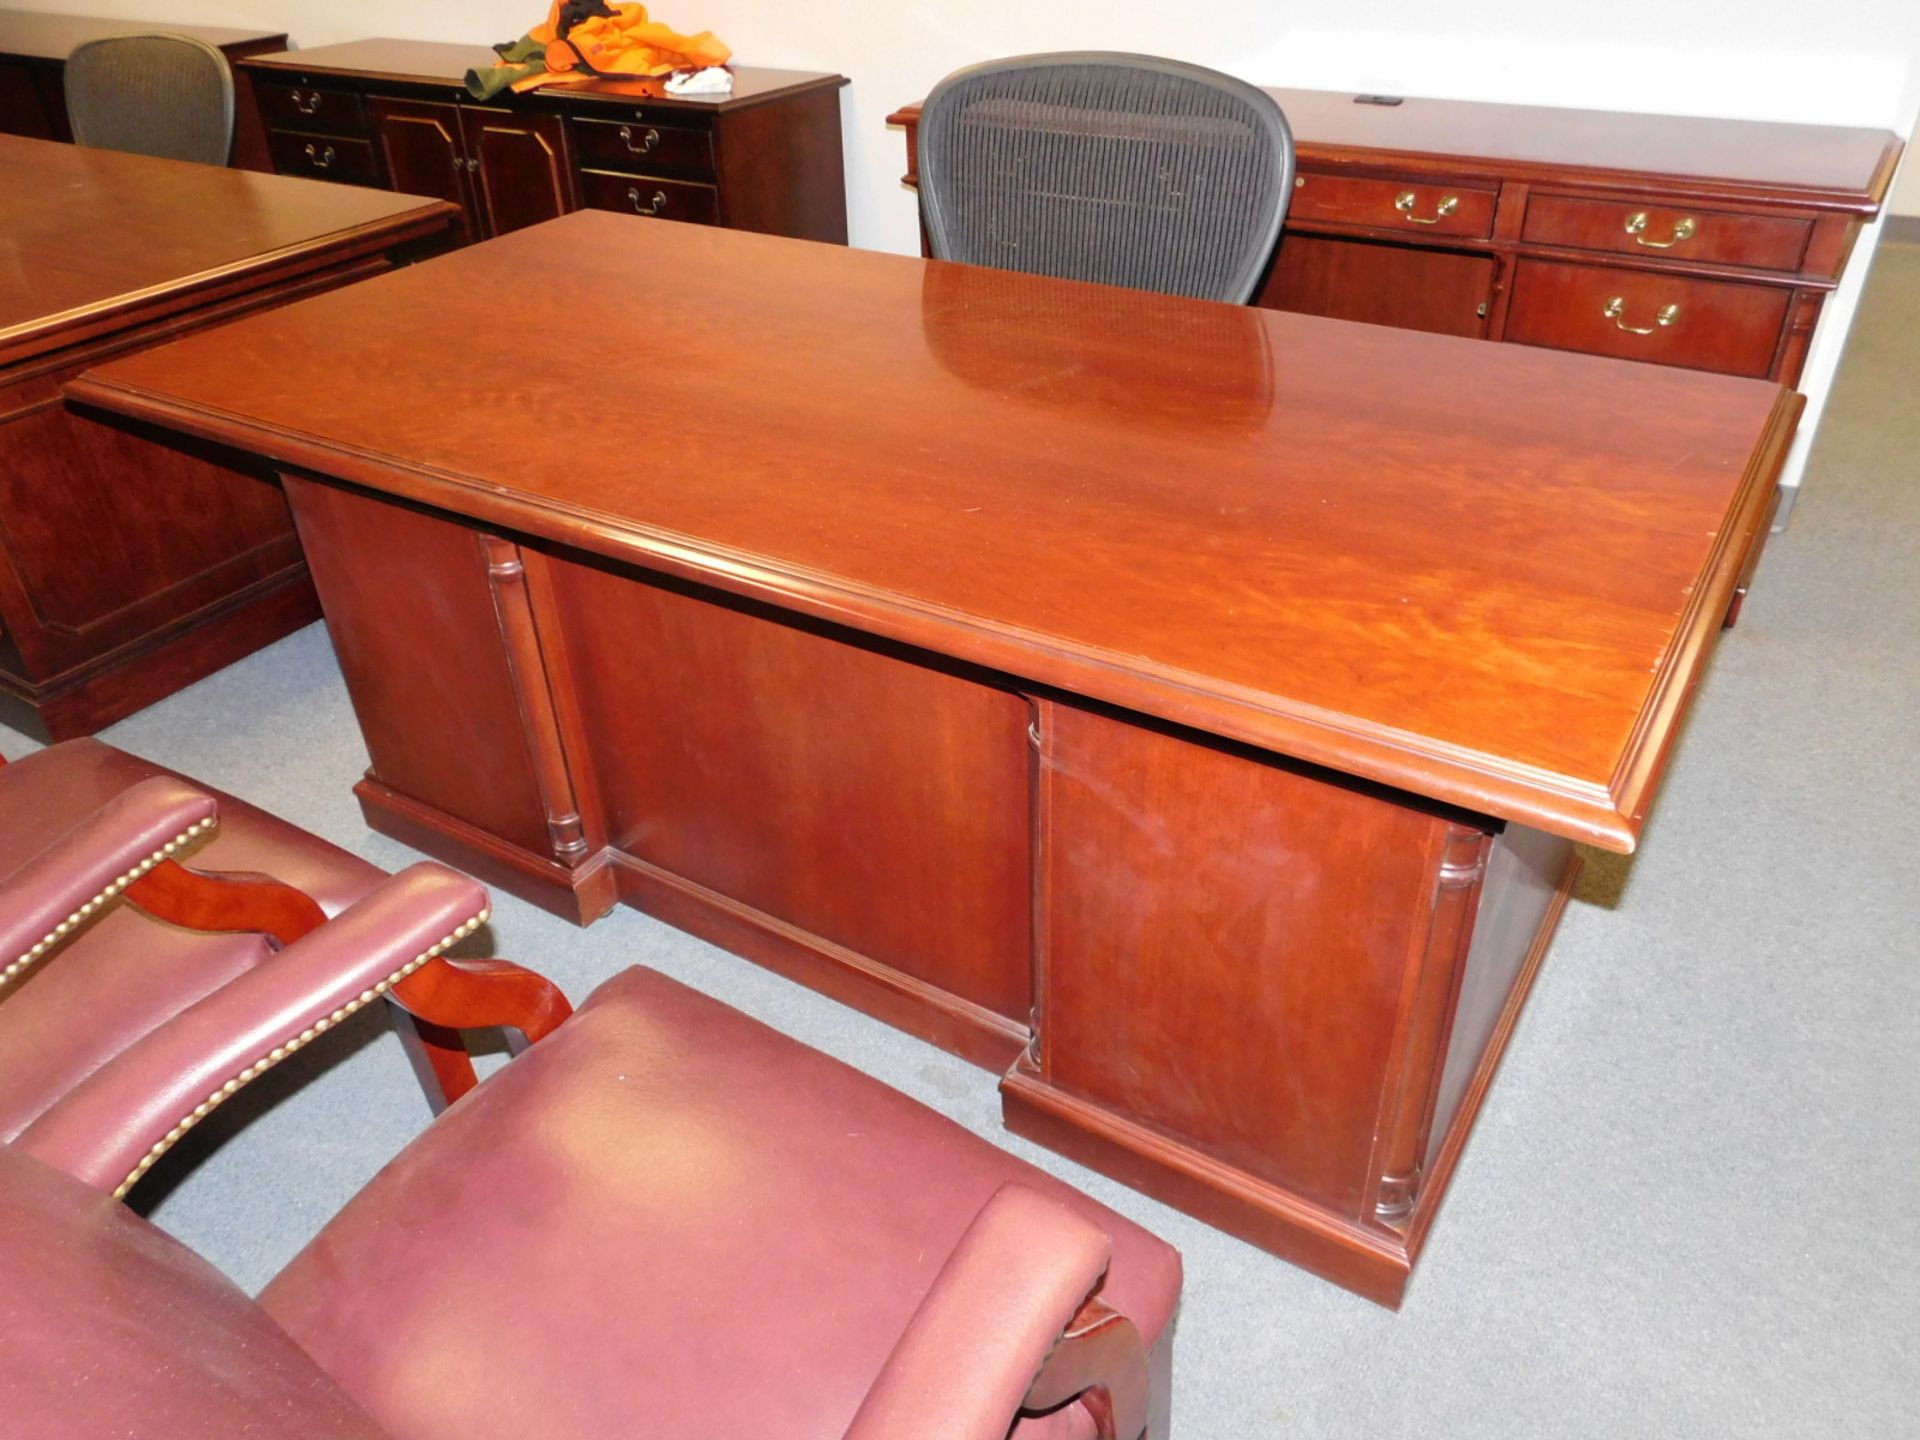 OFS (OFFICE FURNITURE SUITES) CHERRY/MAHOGANY TRADITONAL 36"  X 72" DOUBLE PEDESTAL  EXECUTIVE DESK,